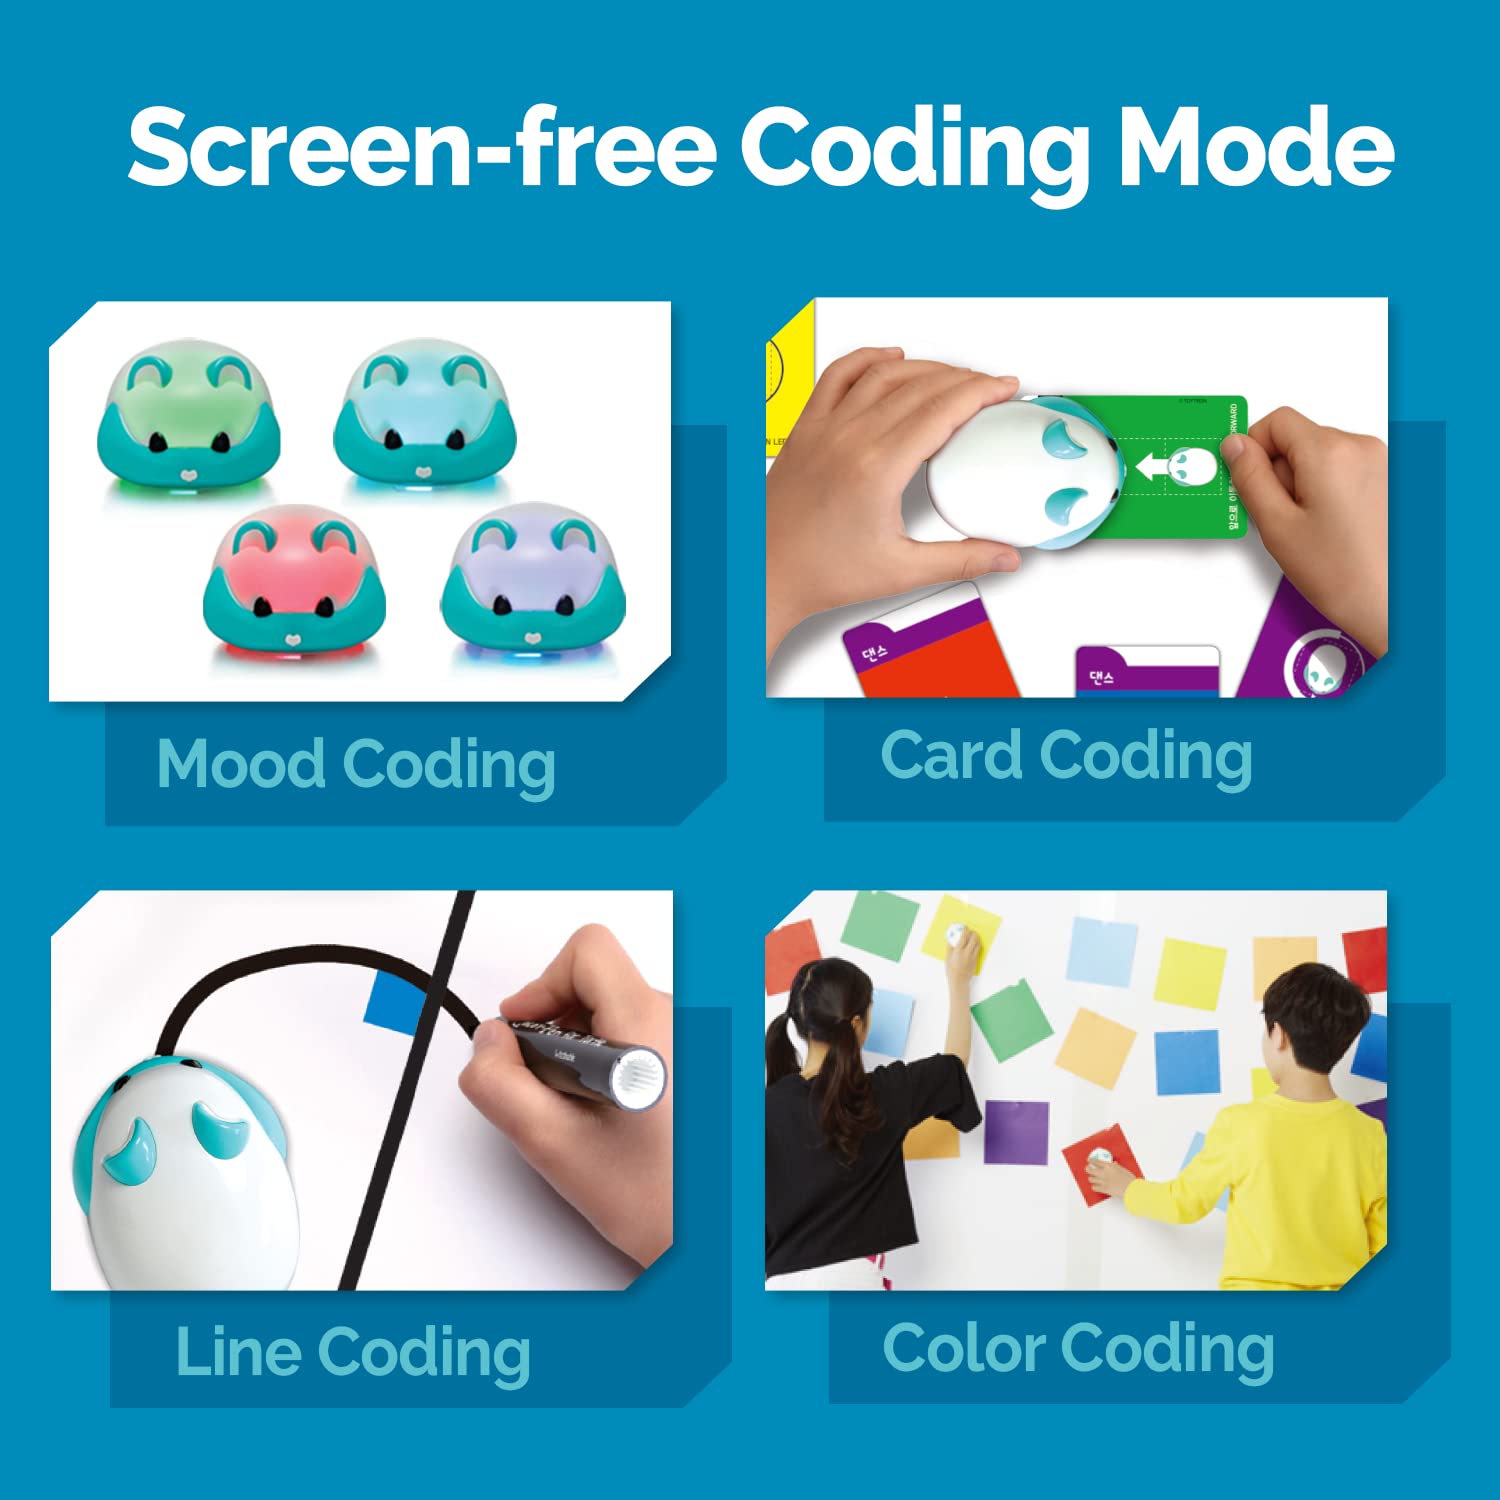 TOYTRON Coding Pet Milky, with Screen Free Mode and App Mode, Usable with Free Coding App - STEM Educational Toy for Problem Solving and Programming Practice - Age 8 + Years